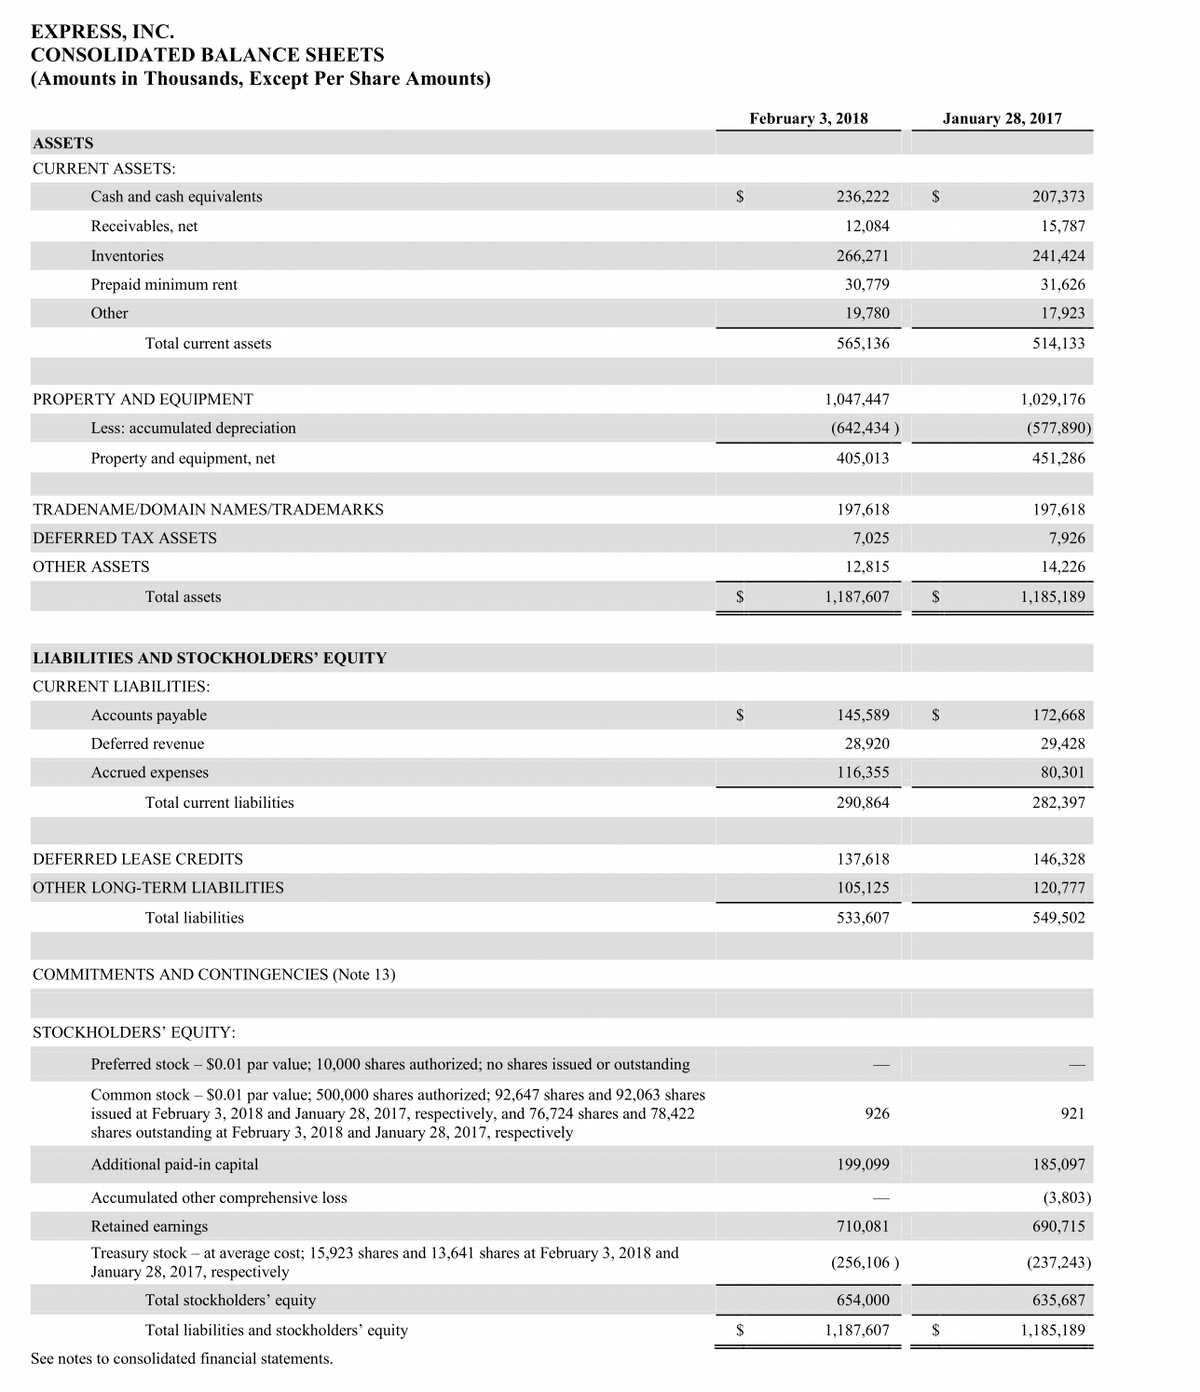 EXPRESS, INC.
CONSOLIDATED BALANCE SHEETS
(Amounts in Thousands, Except Per Share Amounts)
February 3, 2018
January 28, 2017
ASSETS
CURRENT ASSETS:
Cash and cash equivalents
$
236,222
$
207,373
Receivables, net
12,084
15,787
Inventories
266,271
241,424
Prepaid minimum rent
30,779
31,626
Other
19,780
17,923
Total current assets
565,136
514,133
PROPERTY AND EQUIPMENT
1,047,447
1,029,176
Less: accumulated depreciation
(642,434 )
(577,890)
Property and equipment, net
405,013
451,286
TRADENAME/DOMAIN NAMES/TRADEMARKS
197,618
197,618
DEFERRED TAX ASSETS
7,025
7,926
OTHER ASSETS
12,815
14,226
Total assets
$
1,187,607
$
1,185,189
LIABILITIES AND STOCKHOLDERS’ EQUITY
CURRENT LIABILITIES:
Accounts payable
$
145,589
$
172,668
Deferred revenue
28,920
29,428
Accrued expenses
116,355
80,301
Total current liabilities
290,864
282,397
DEFERRED LEASE CREDITS
137,618
146,328
OTHER LONG-TERM LIABILITIES
105,125
120,777
Total liabilities
533,607
549,502
COMMITMENTS AND CONTINGENCIES (Note 13)
STOCKHOLDERS' EQUITY:
Preferred stock – $0.01 par value; 10,000 shares authorized; no shares issued or outstanding
Common stock – $0.01 par value; 500,000 shares authorized; 92,647 shares and 92,063 shares
issued at February 3, 2018 and January 28, 2017, respectively, and 76,724 shares and 78,422
shares outstanding at February 3, 2018 and January 28, 2017, respectively
926
921
Additional paid-in capital
199,099
185,097
Accumulated other comprehensive loss
(3,803)
Retained earnings
710,081
690,715
Treasury stock – at average cost; 15,923 shares and 13,641 shares at February 3, 2018 and
January 28, 2017, respectively
(256,106 )
(237,243)
Total stockholders' equity
654,000
635,687
Total liabilities and stockholders’ equity
2$
1,187,607
$
1,185,189
See notes to consolidated financial statements.
